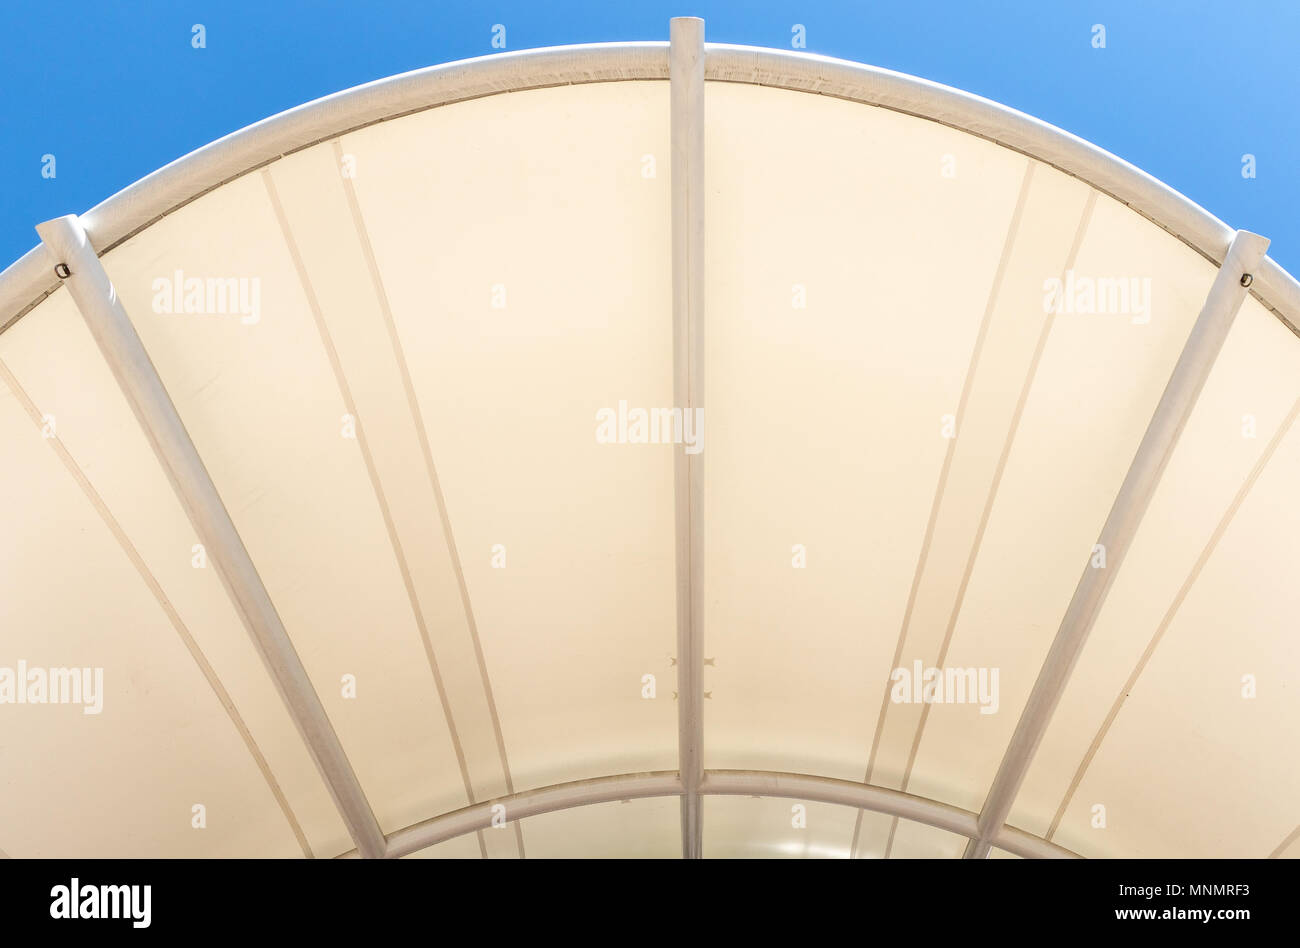 The roof (awning) of the amphitheatre in Pack Square, Asheville, NC, USA, forming a symmetric pattern against a blue sky. Stock Photo